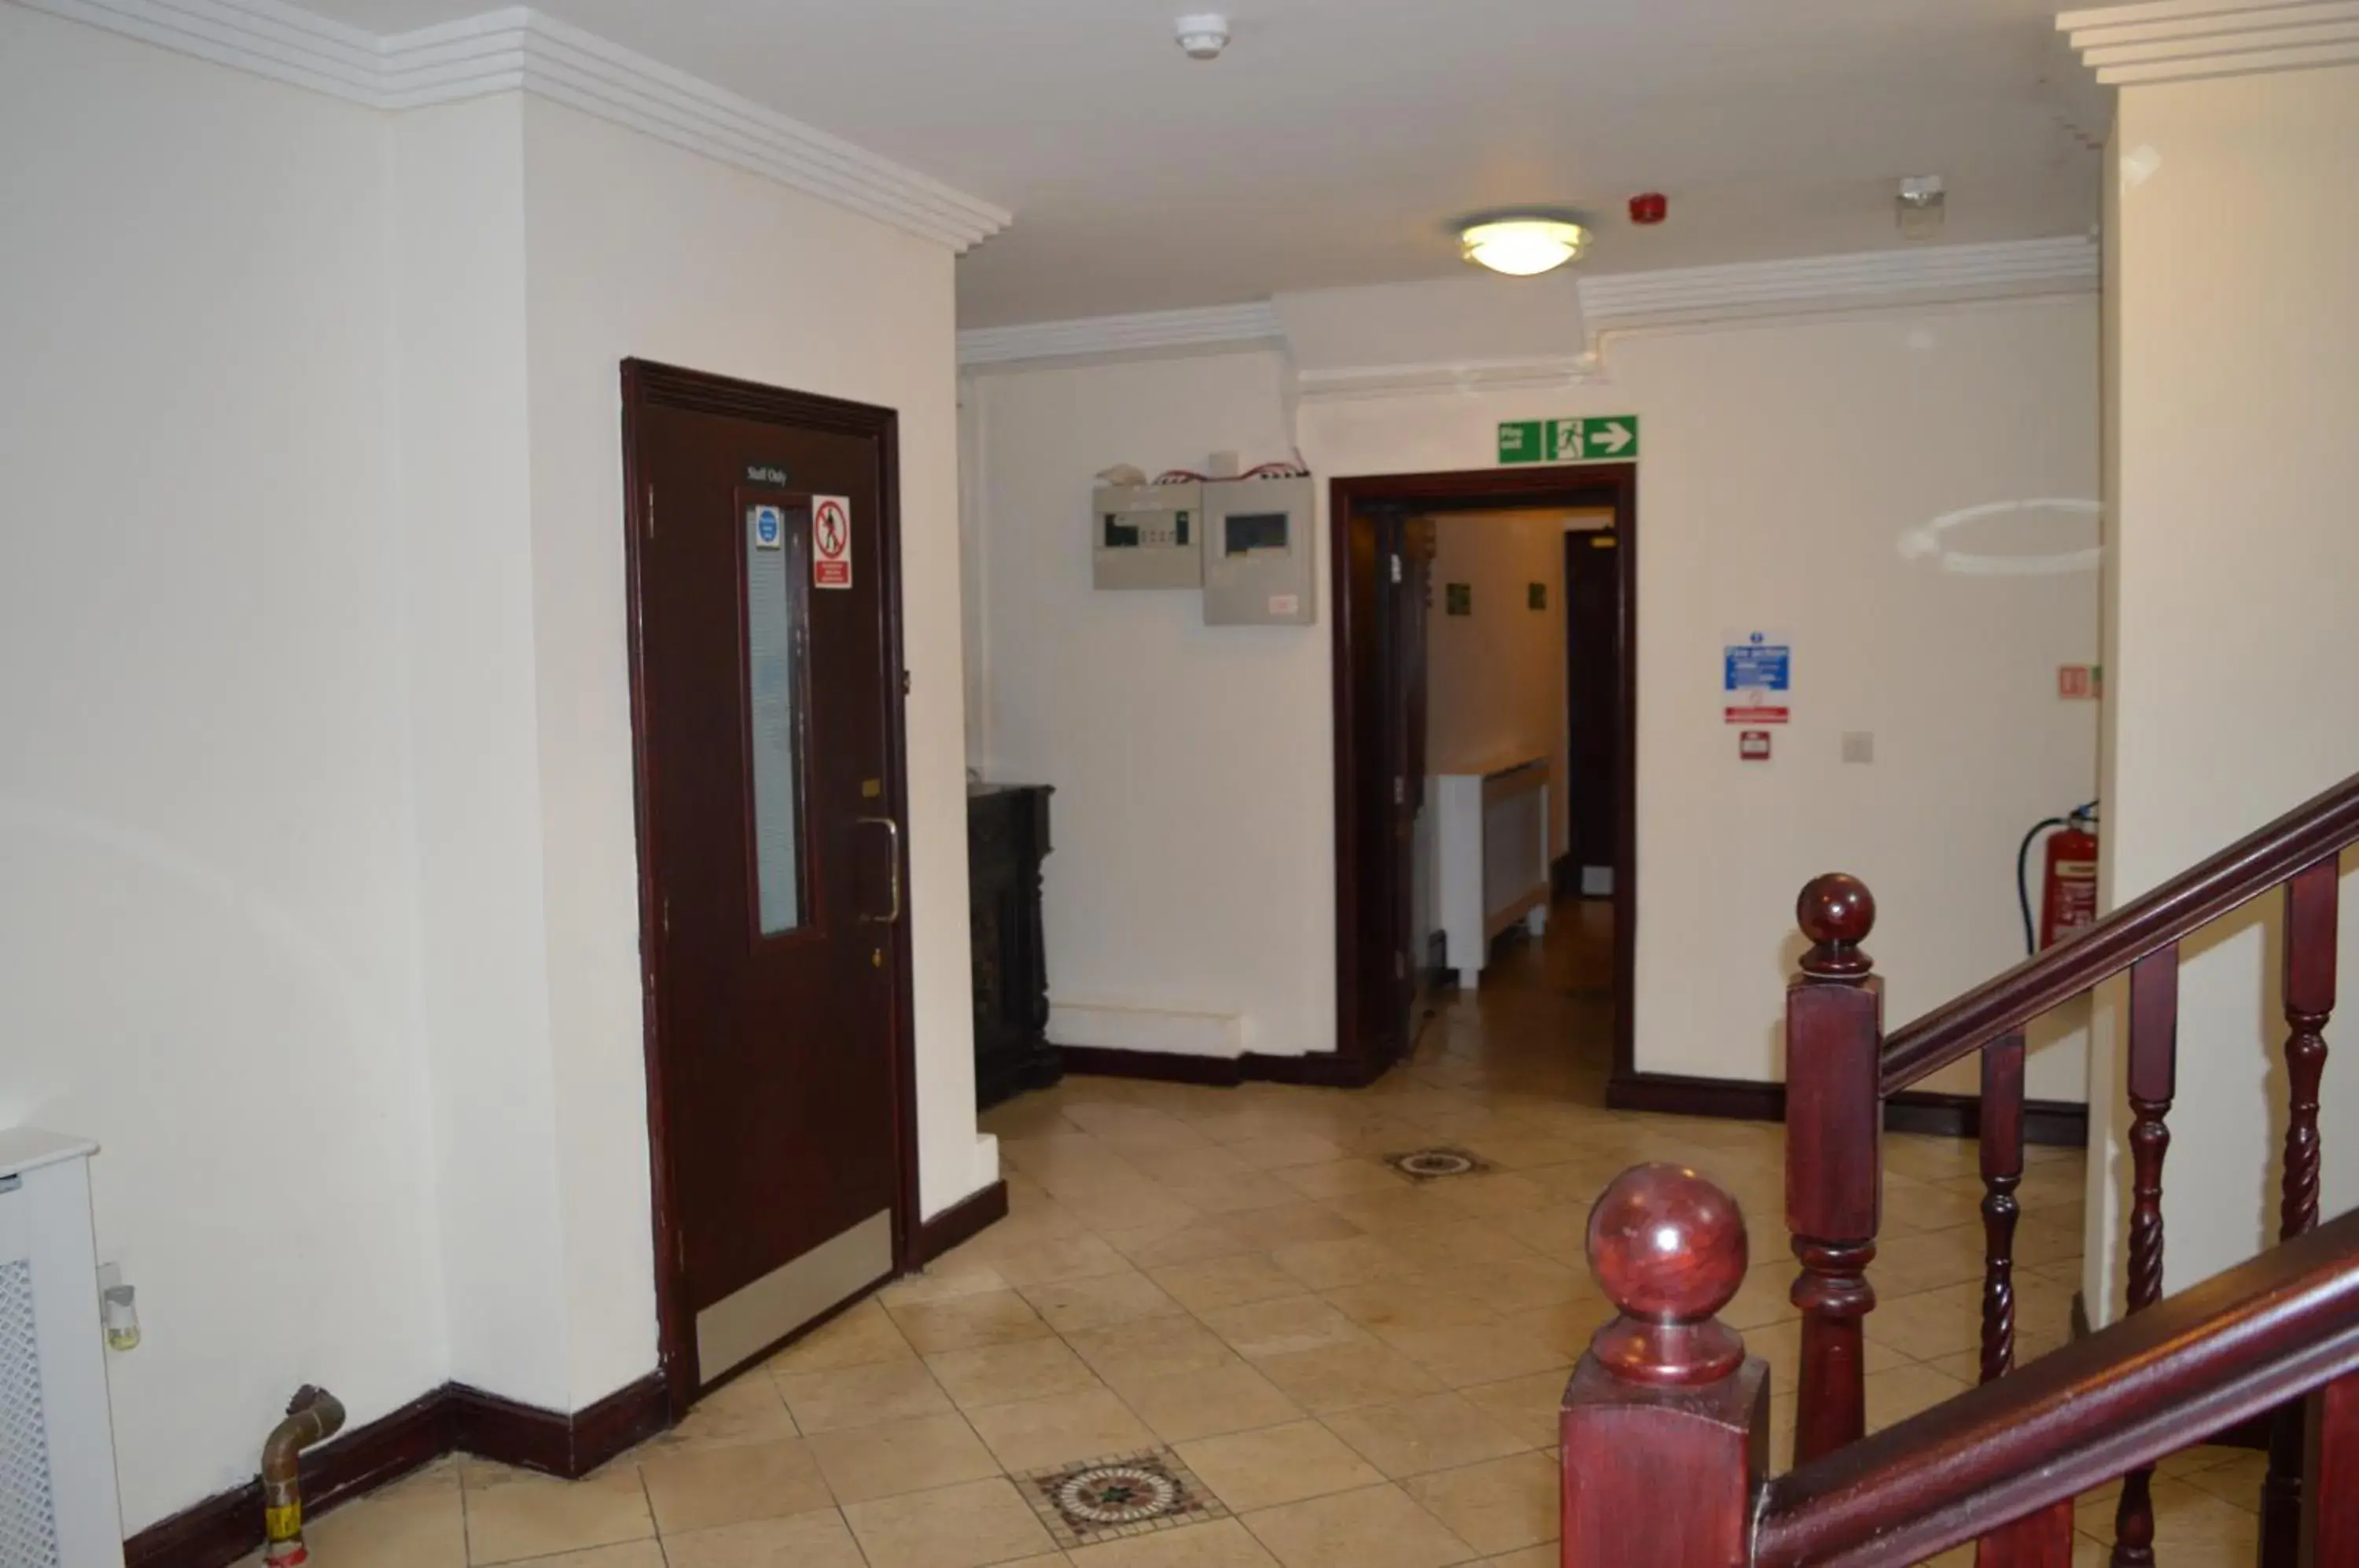 Area and facilities in Globe Hotel